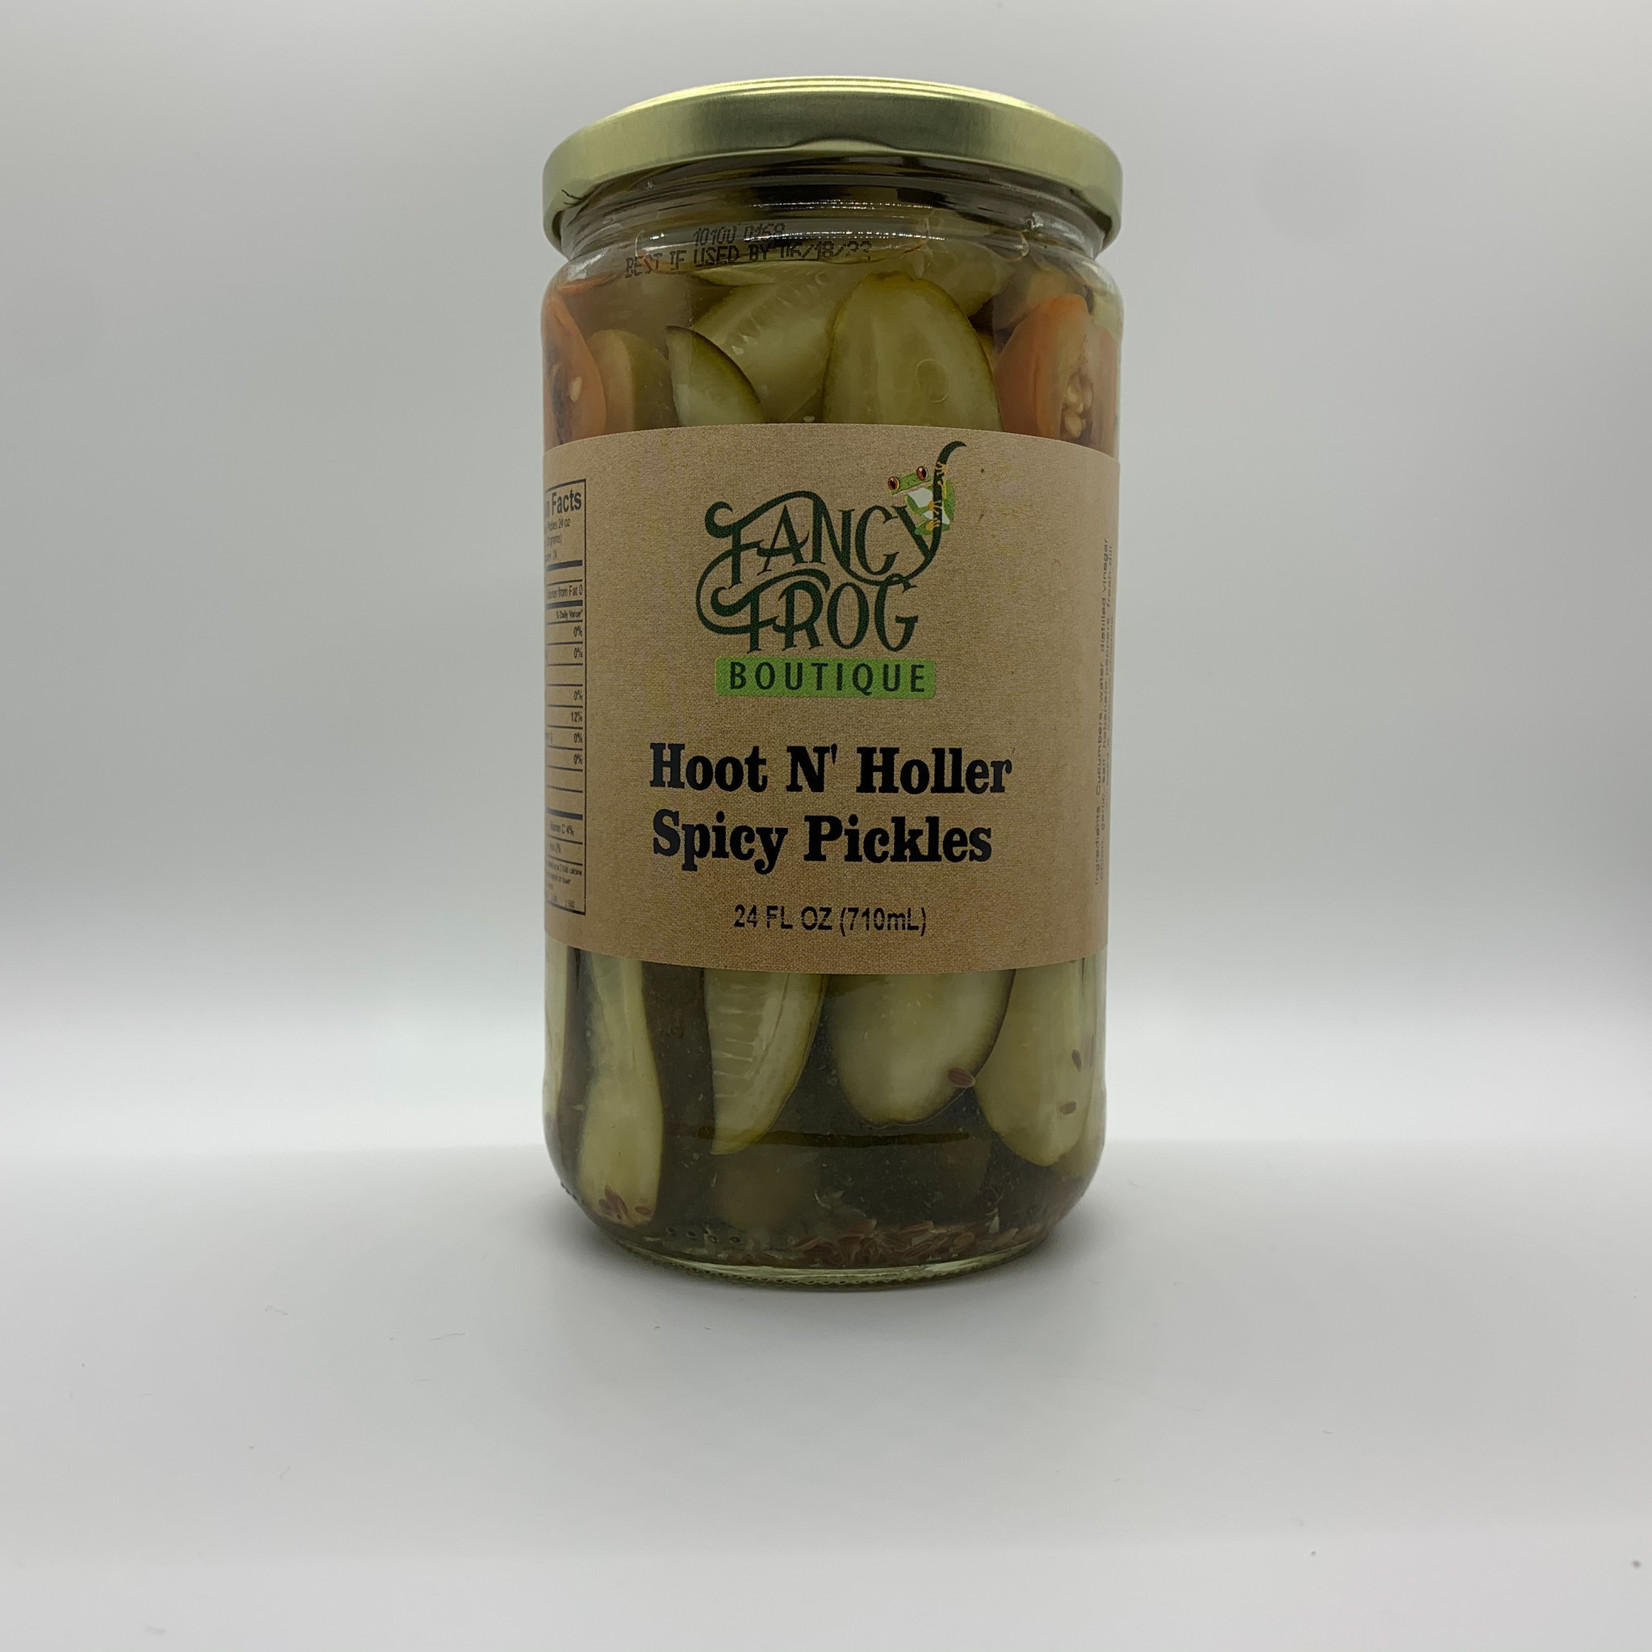 Fancy Frog Boutique Hoot N Holler Spicy Pickles